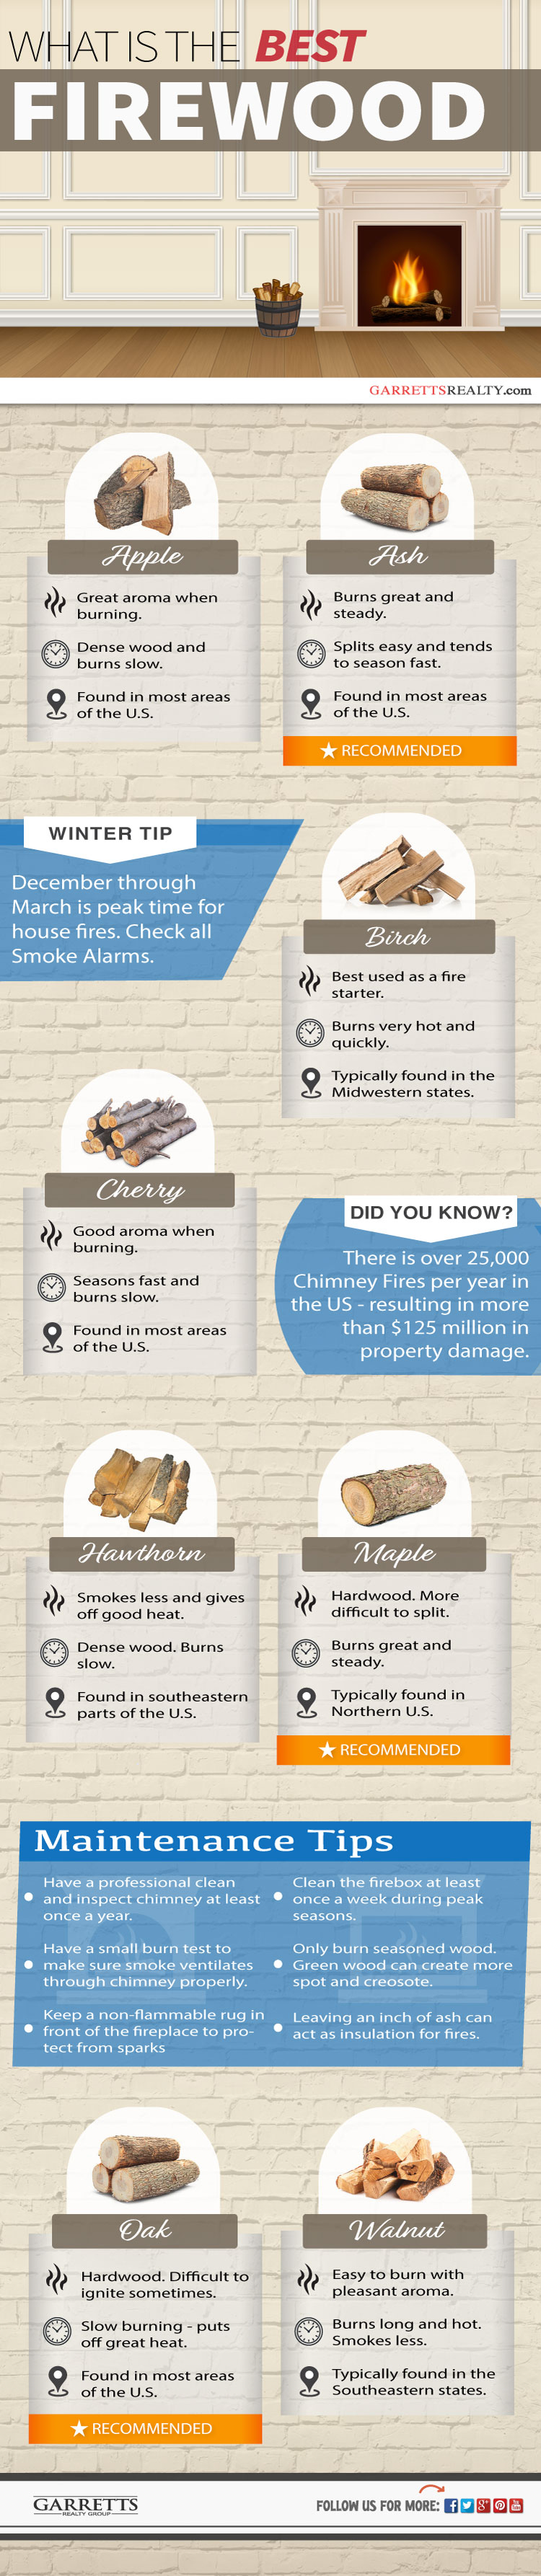 best types of firewood - Infographic.